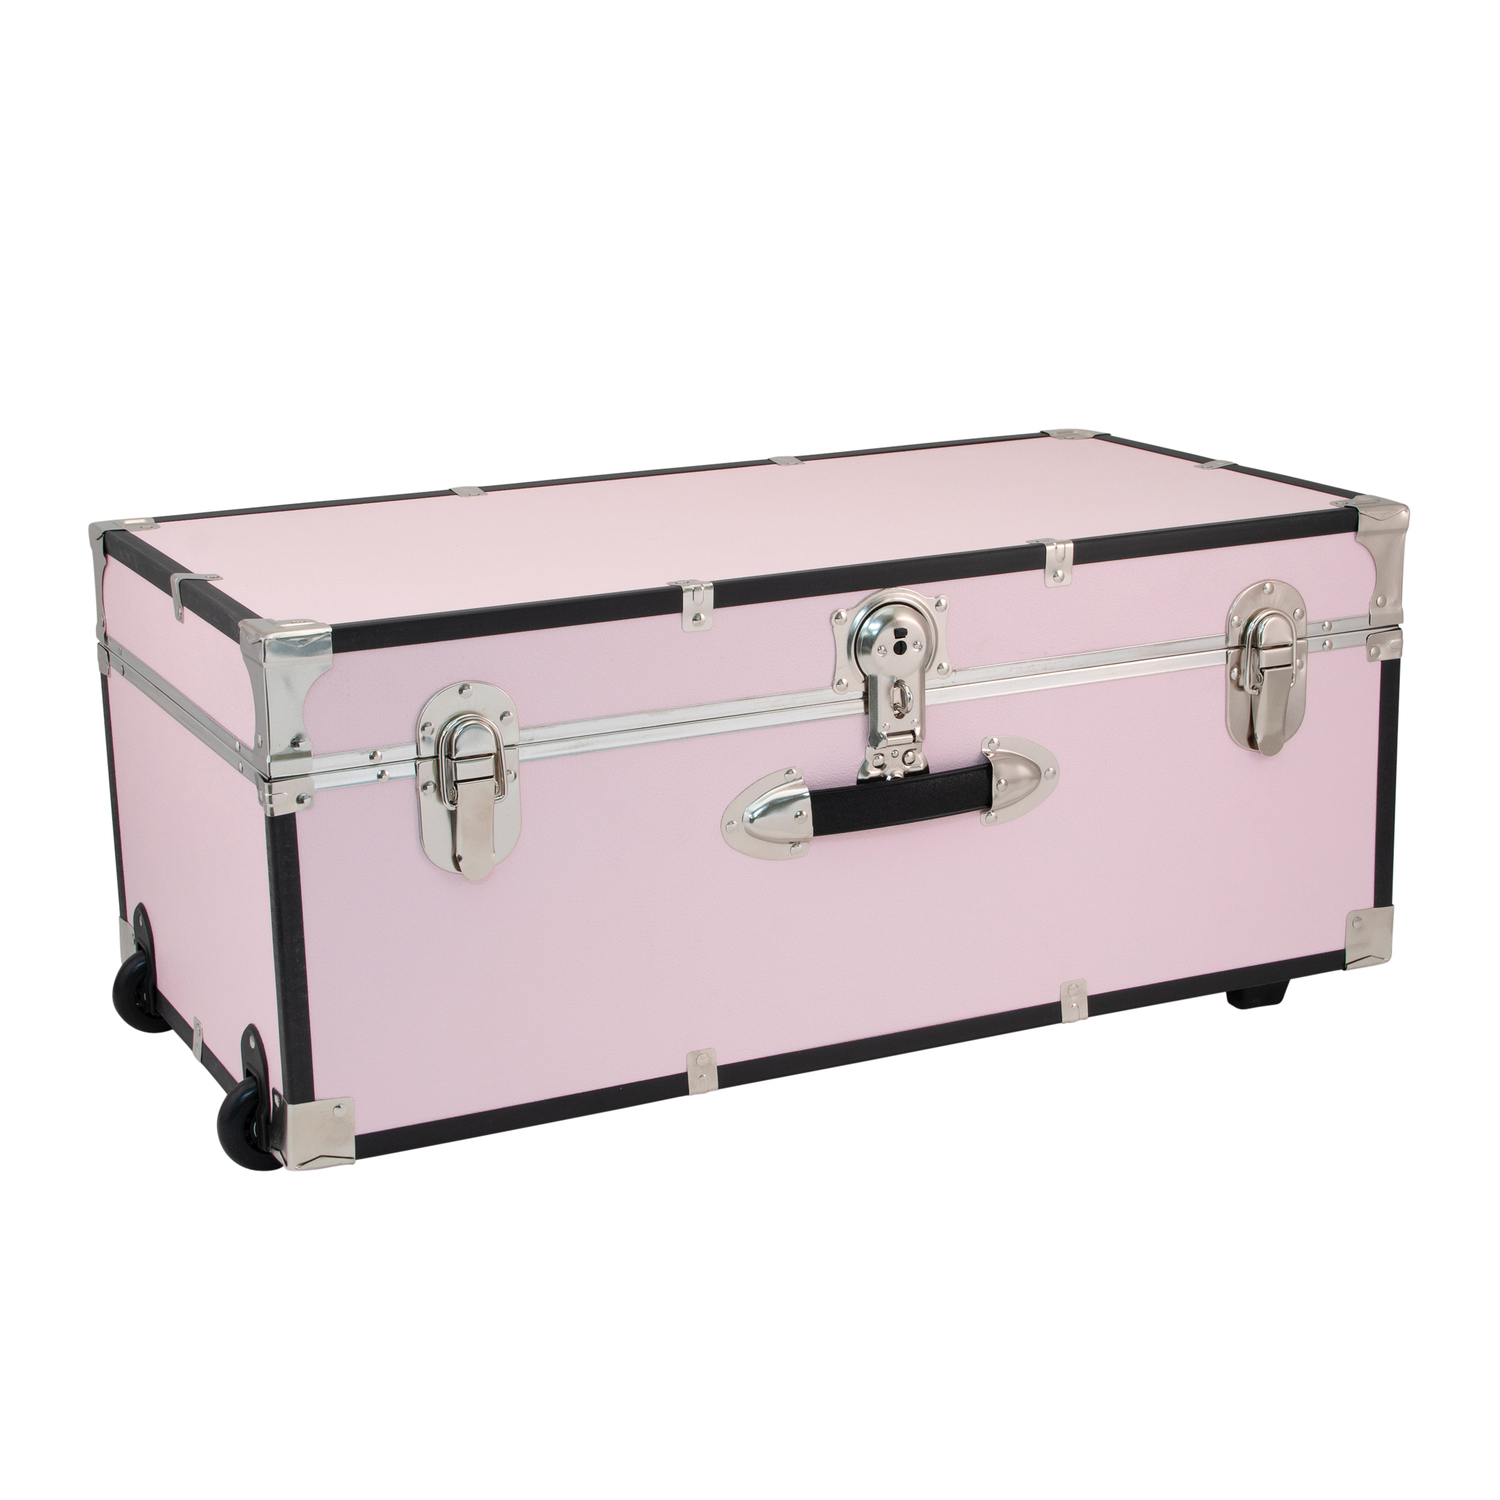 Seward Trunks 30" Trunk with Wheels and Lock in Blush Pink - image 1 of 6